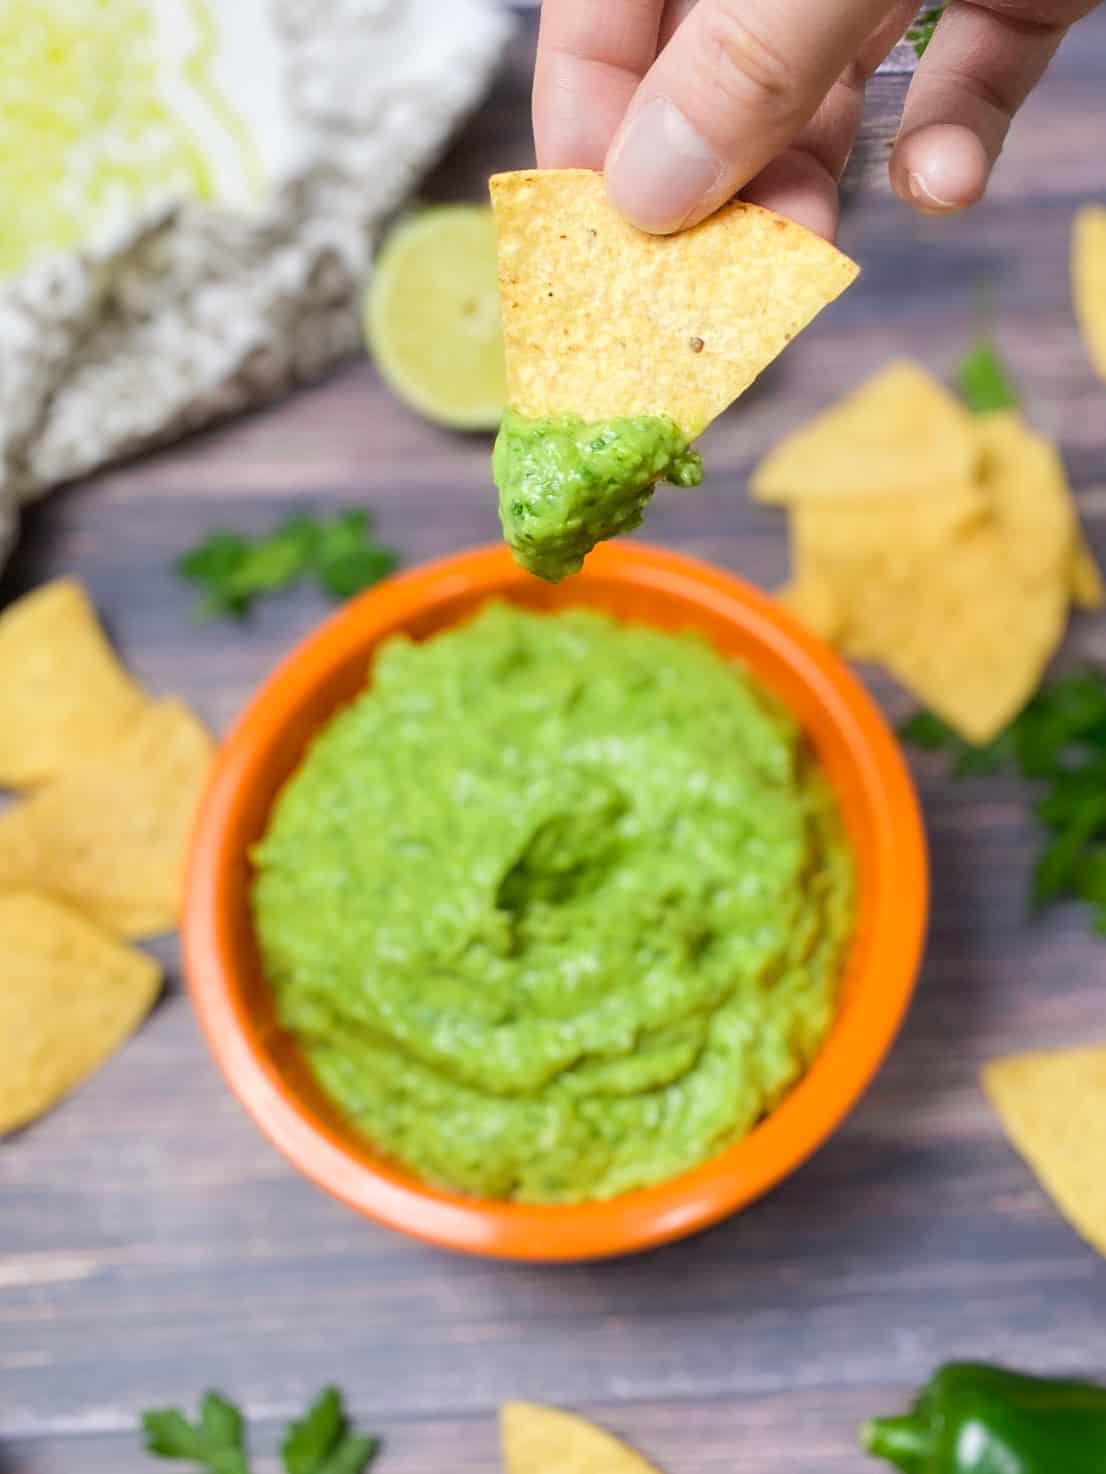 tortilla chip dunked in guasacaca being held up over the bowl of dip